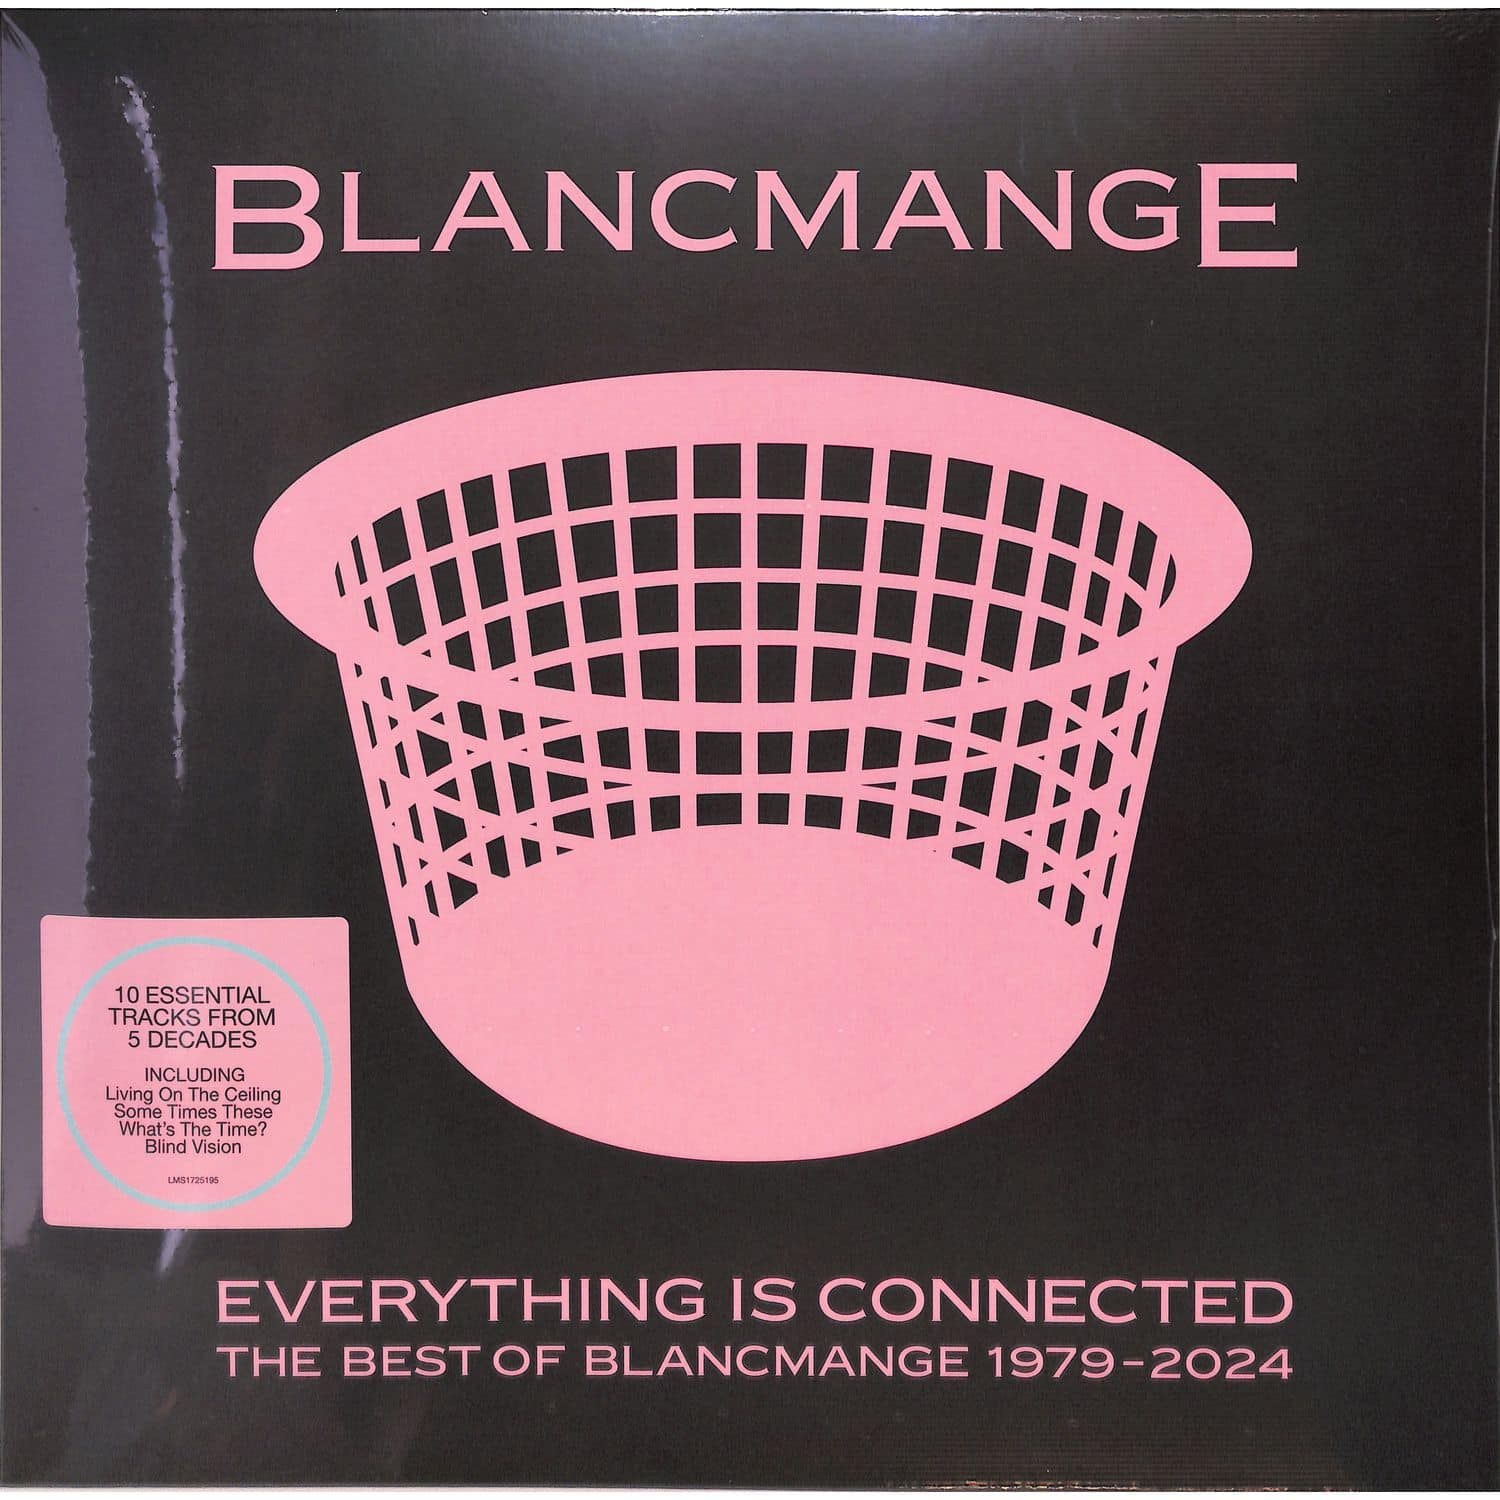 Blancmange - EVERYTHING IS CONNECTED - BEST OF 